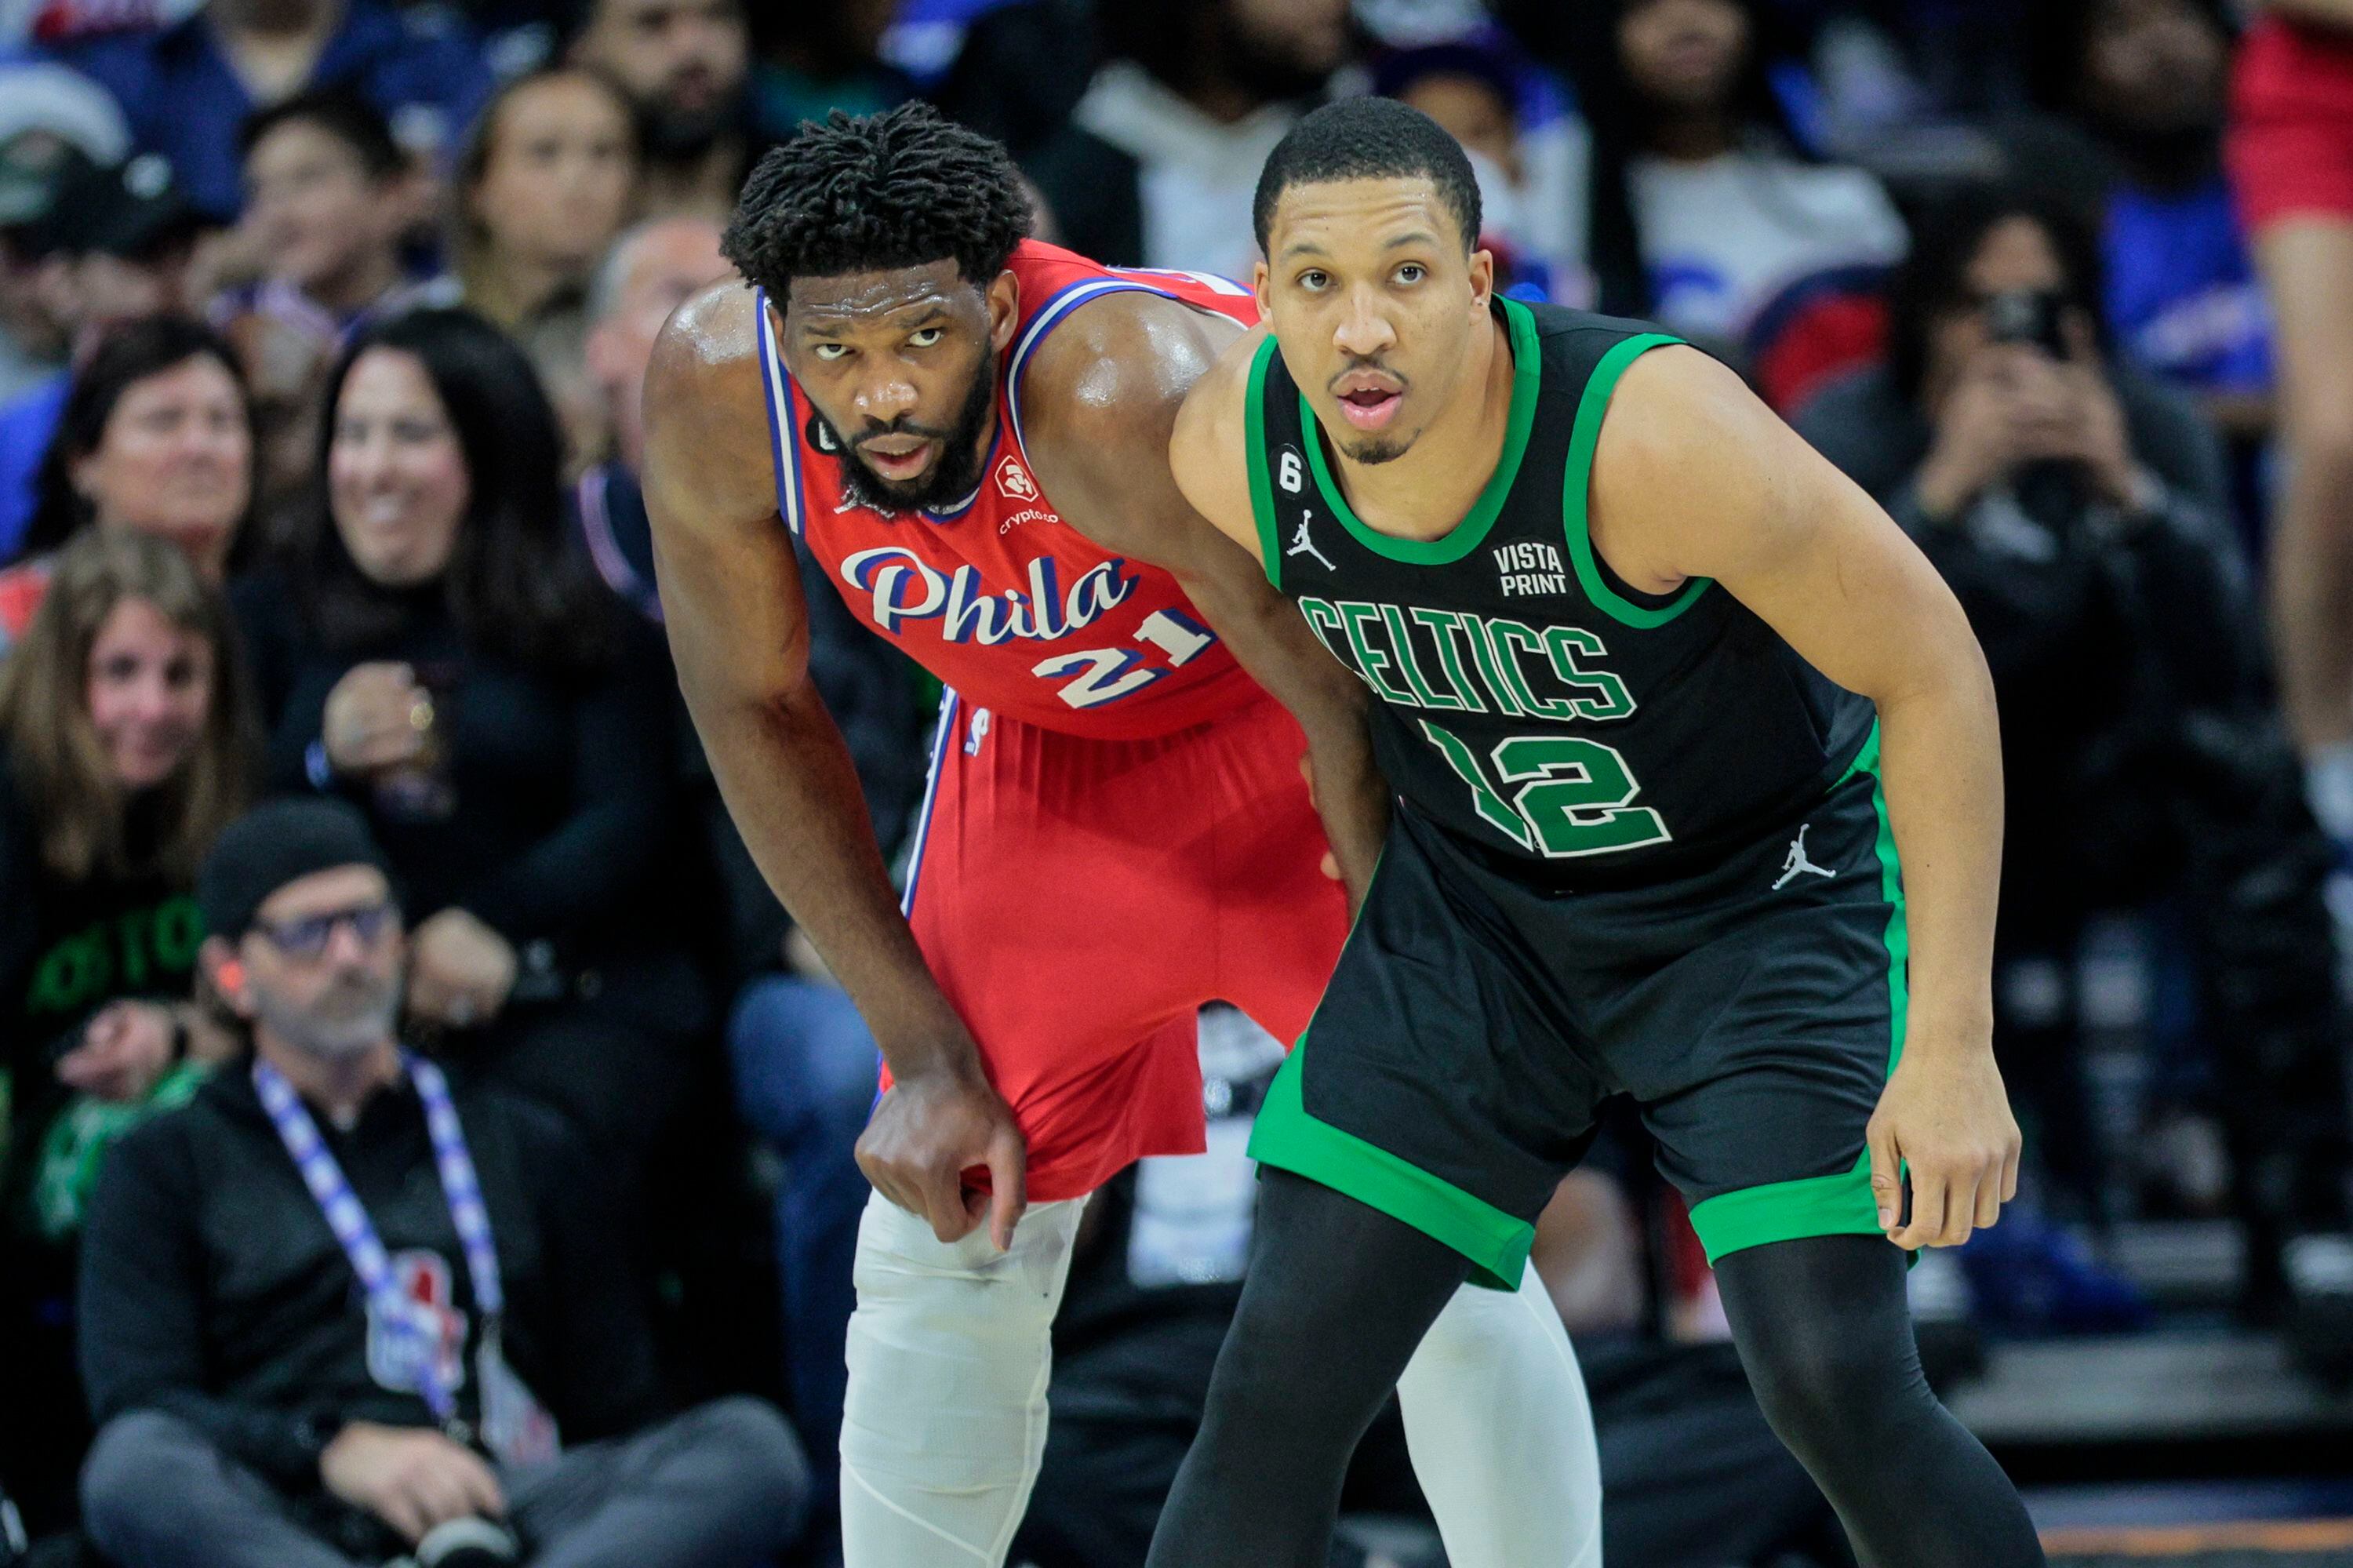 Celtics Player's Time Lord Nickname Is Confusing Doctor Who Fans